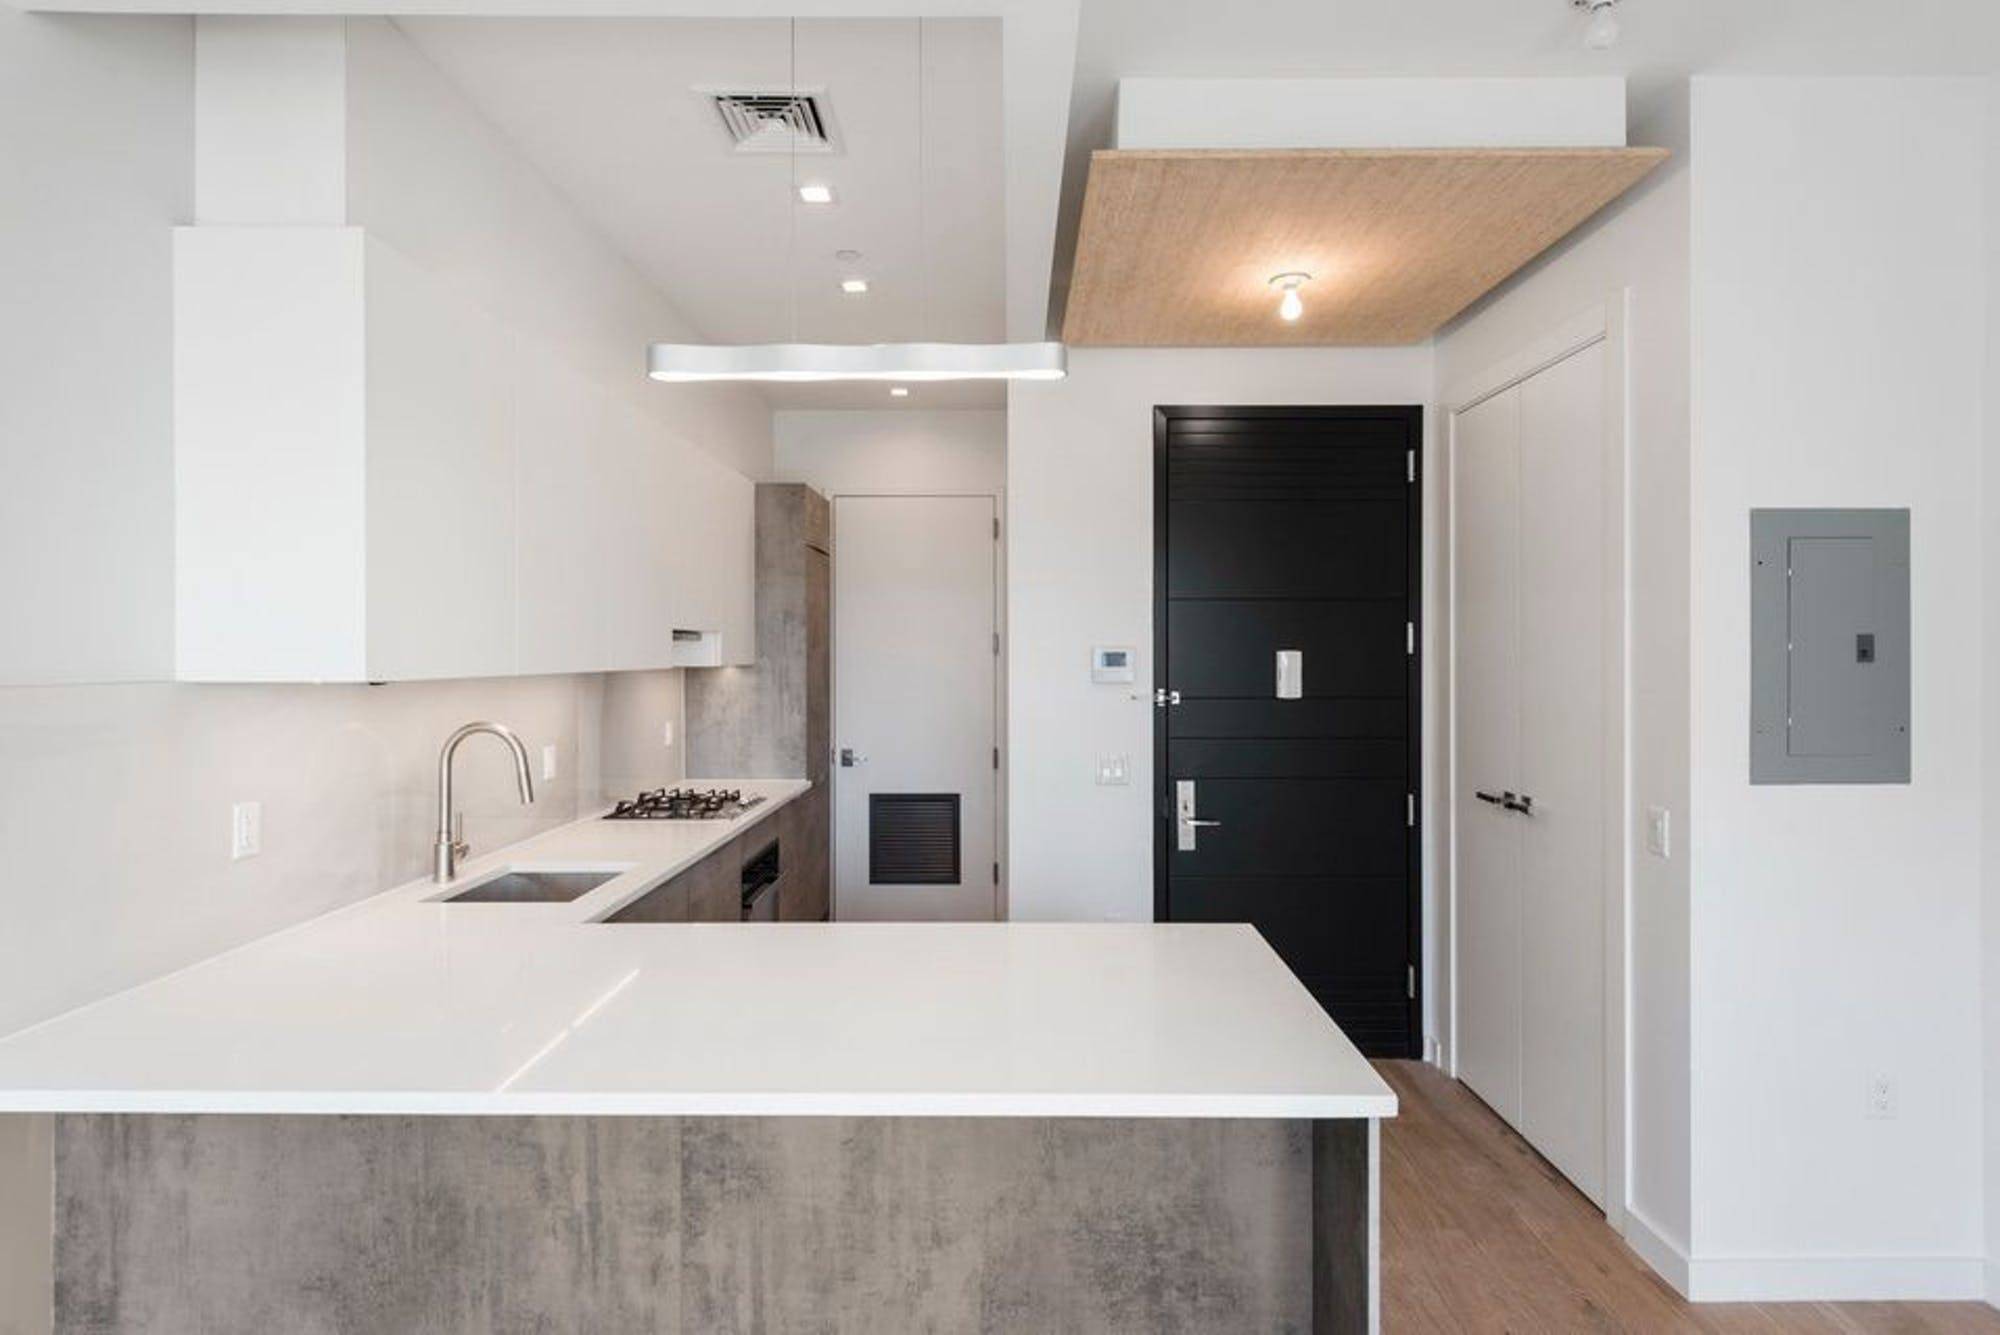 A brand new condo situated one block away from McCarren Park, this contemporary 1 bedroom, 1 bathroom home blends modern fixtures and finishes with private outdoor space.